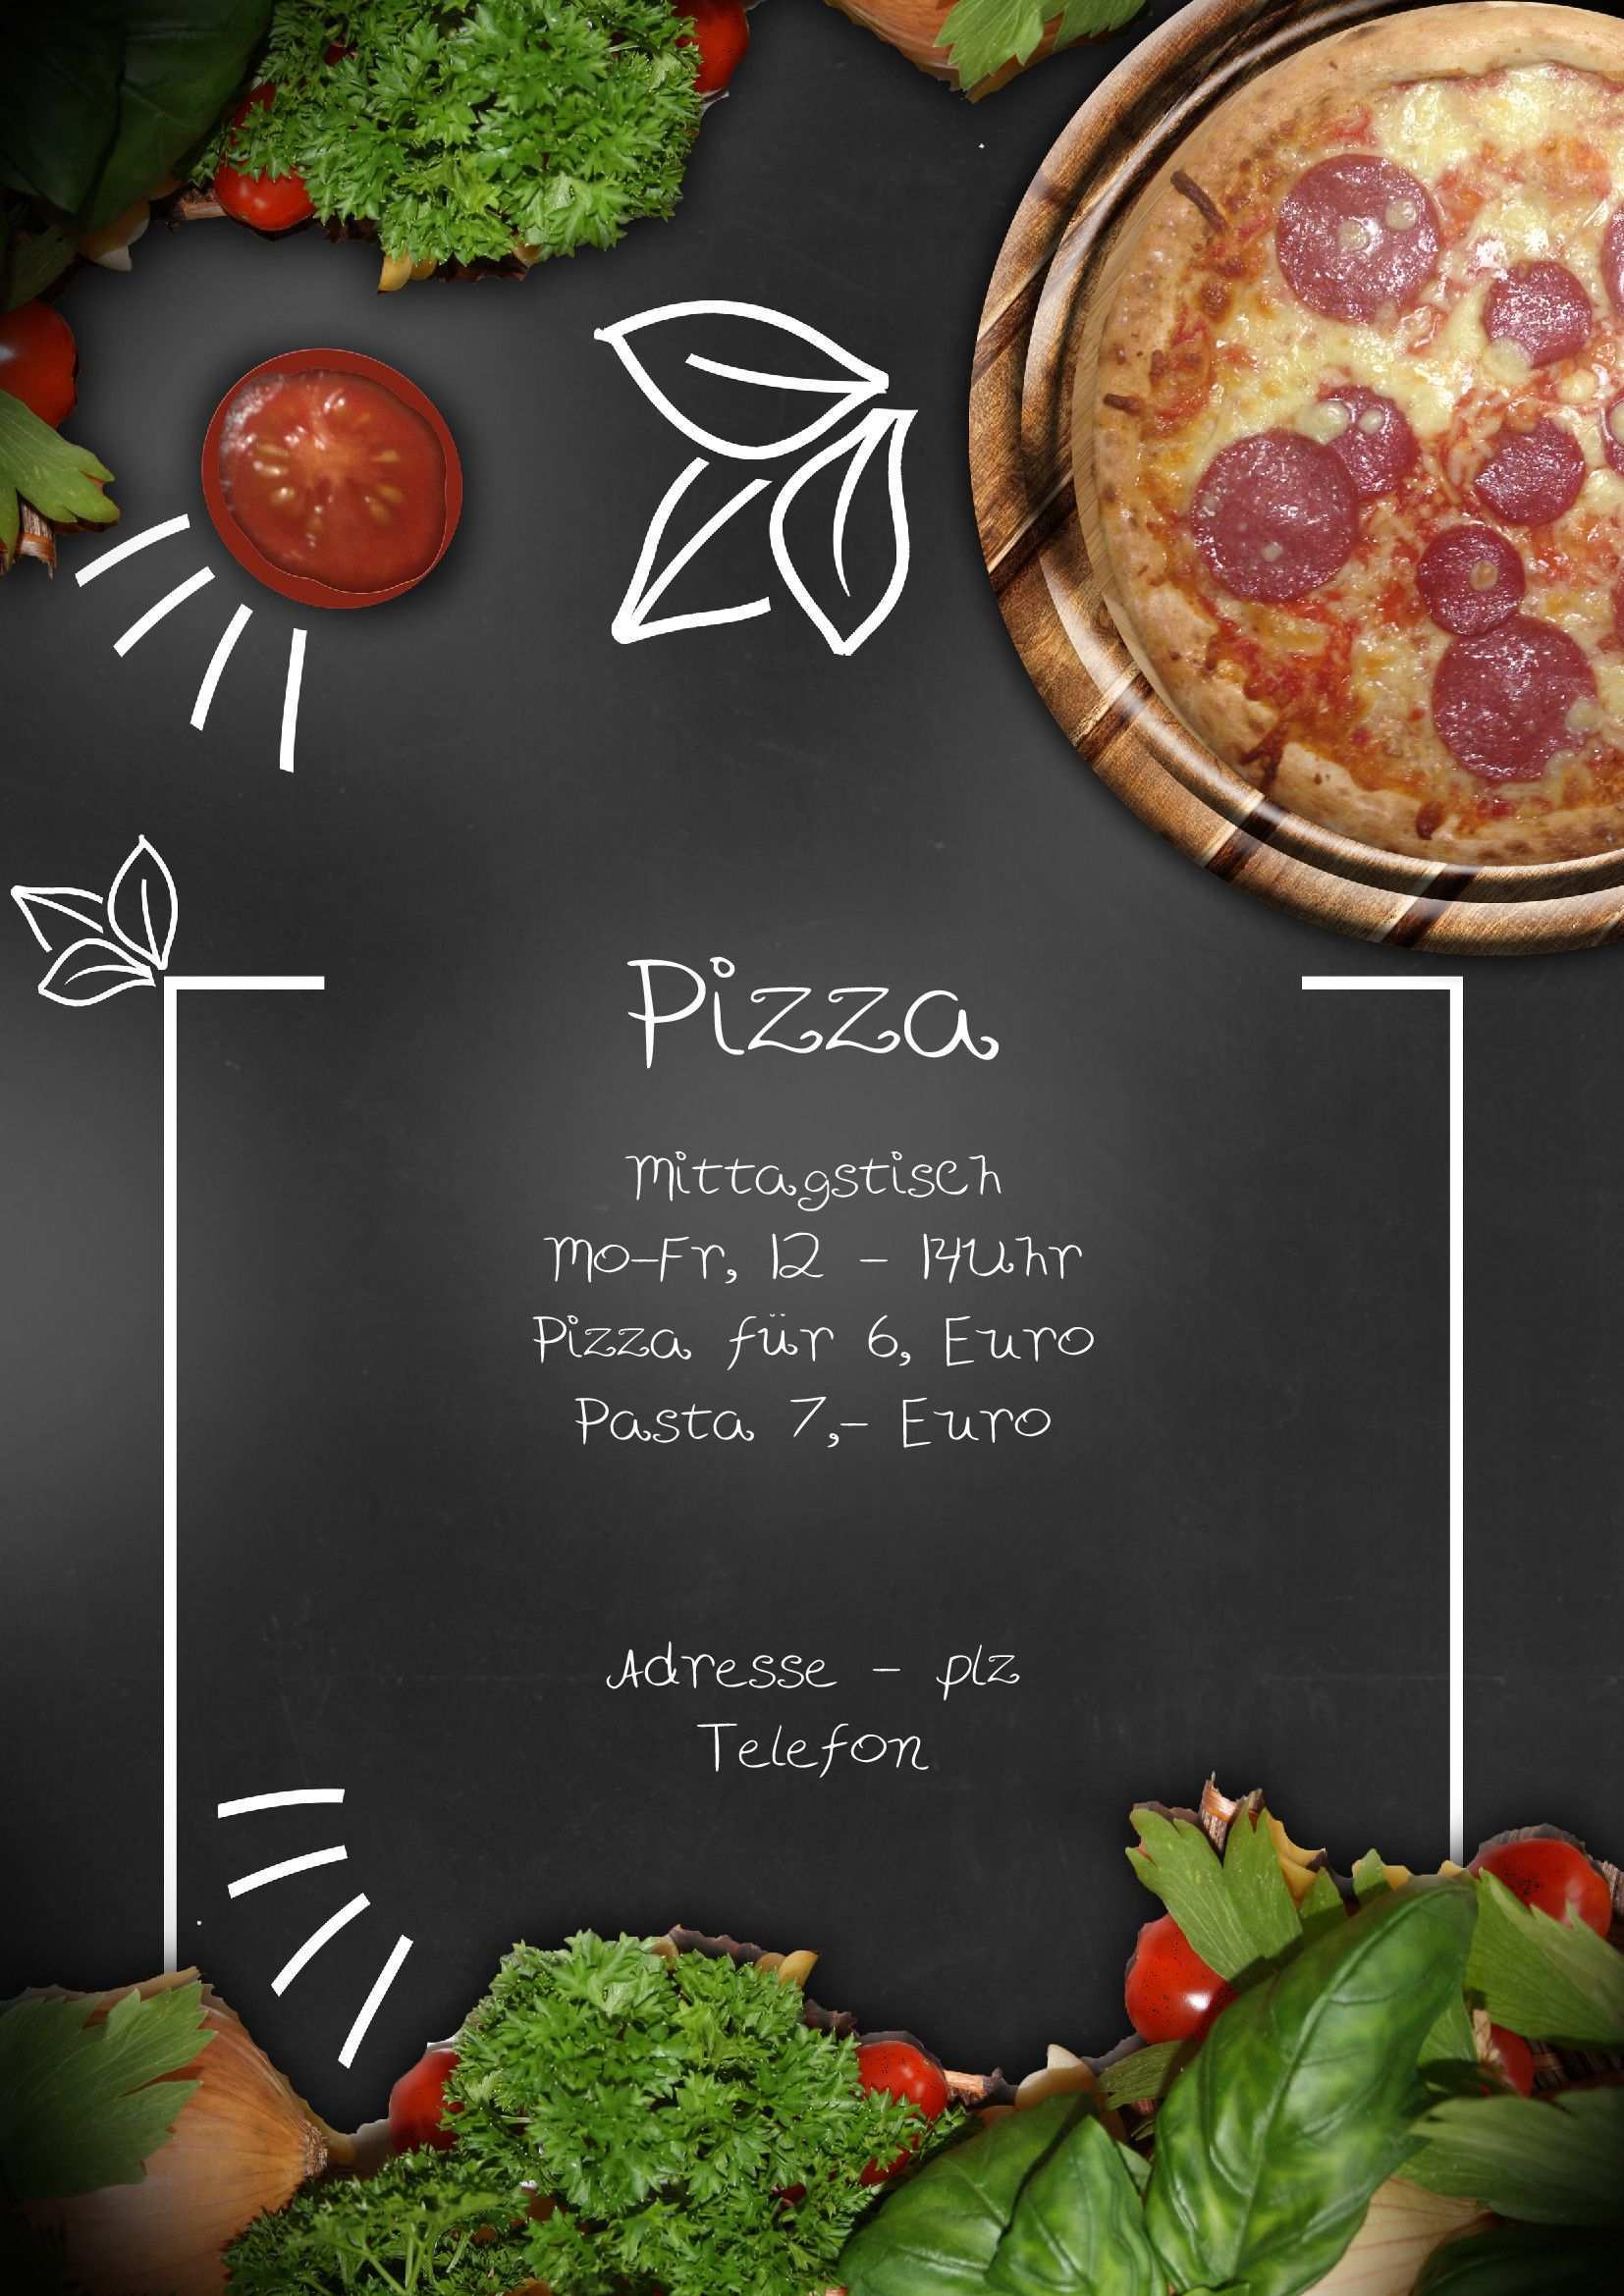 Flyers Are Frequently Used By Pizza Outlets As An Effective Means Of Advertisement Whenever There Is A New Deal Or Of Speisekarte Pizza Menu Essen Menu Design